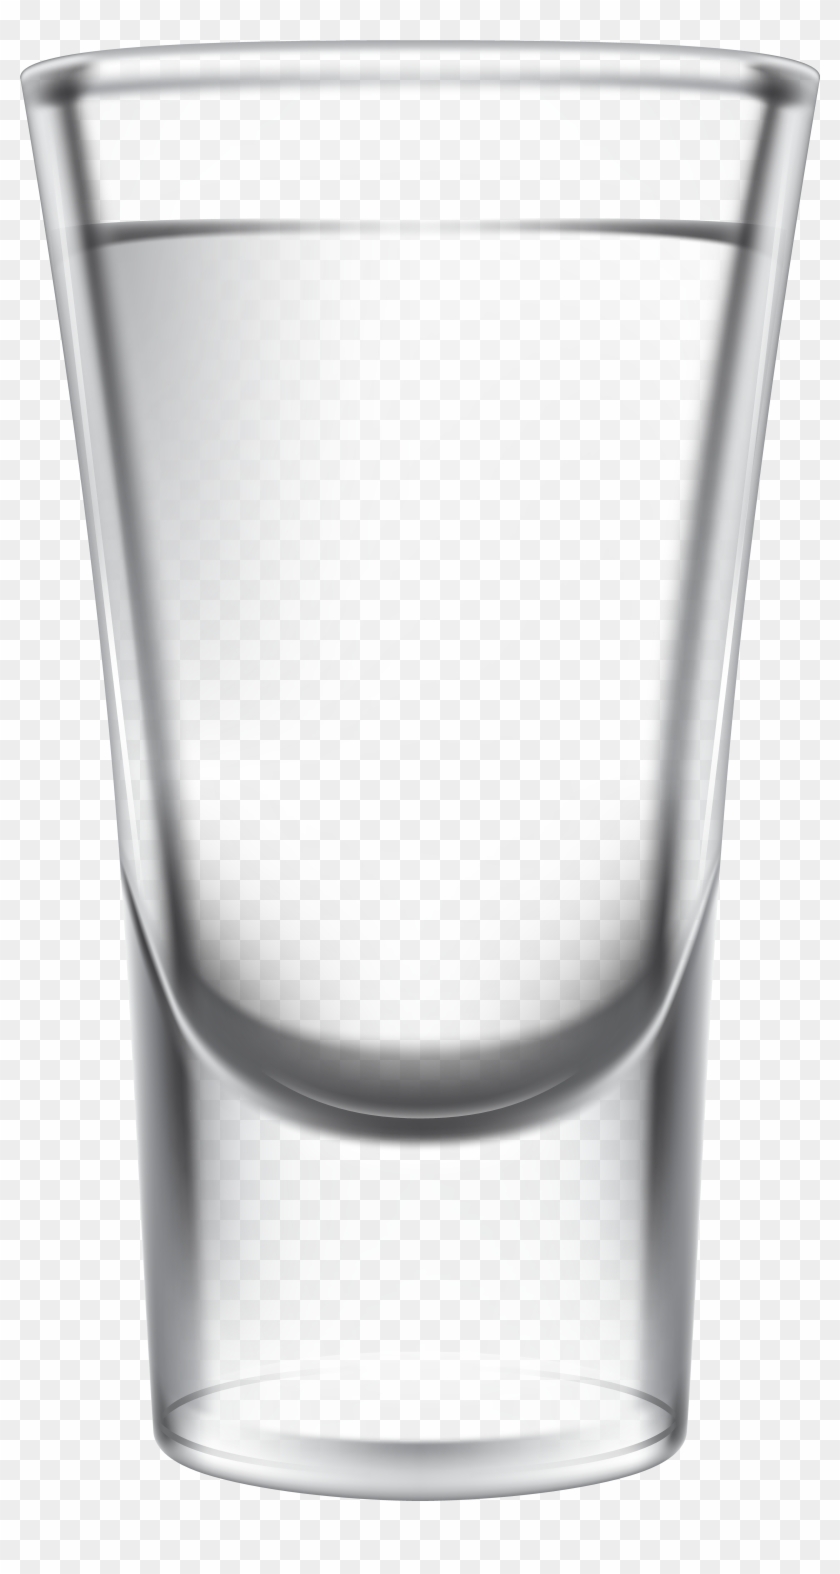 Jpg Glass Of Water Clipart Black And White - Clipart Black And White Glass Of Water - Png Download #1093898